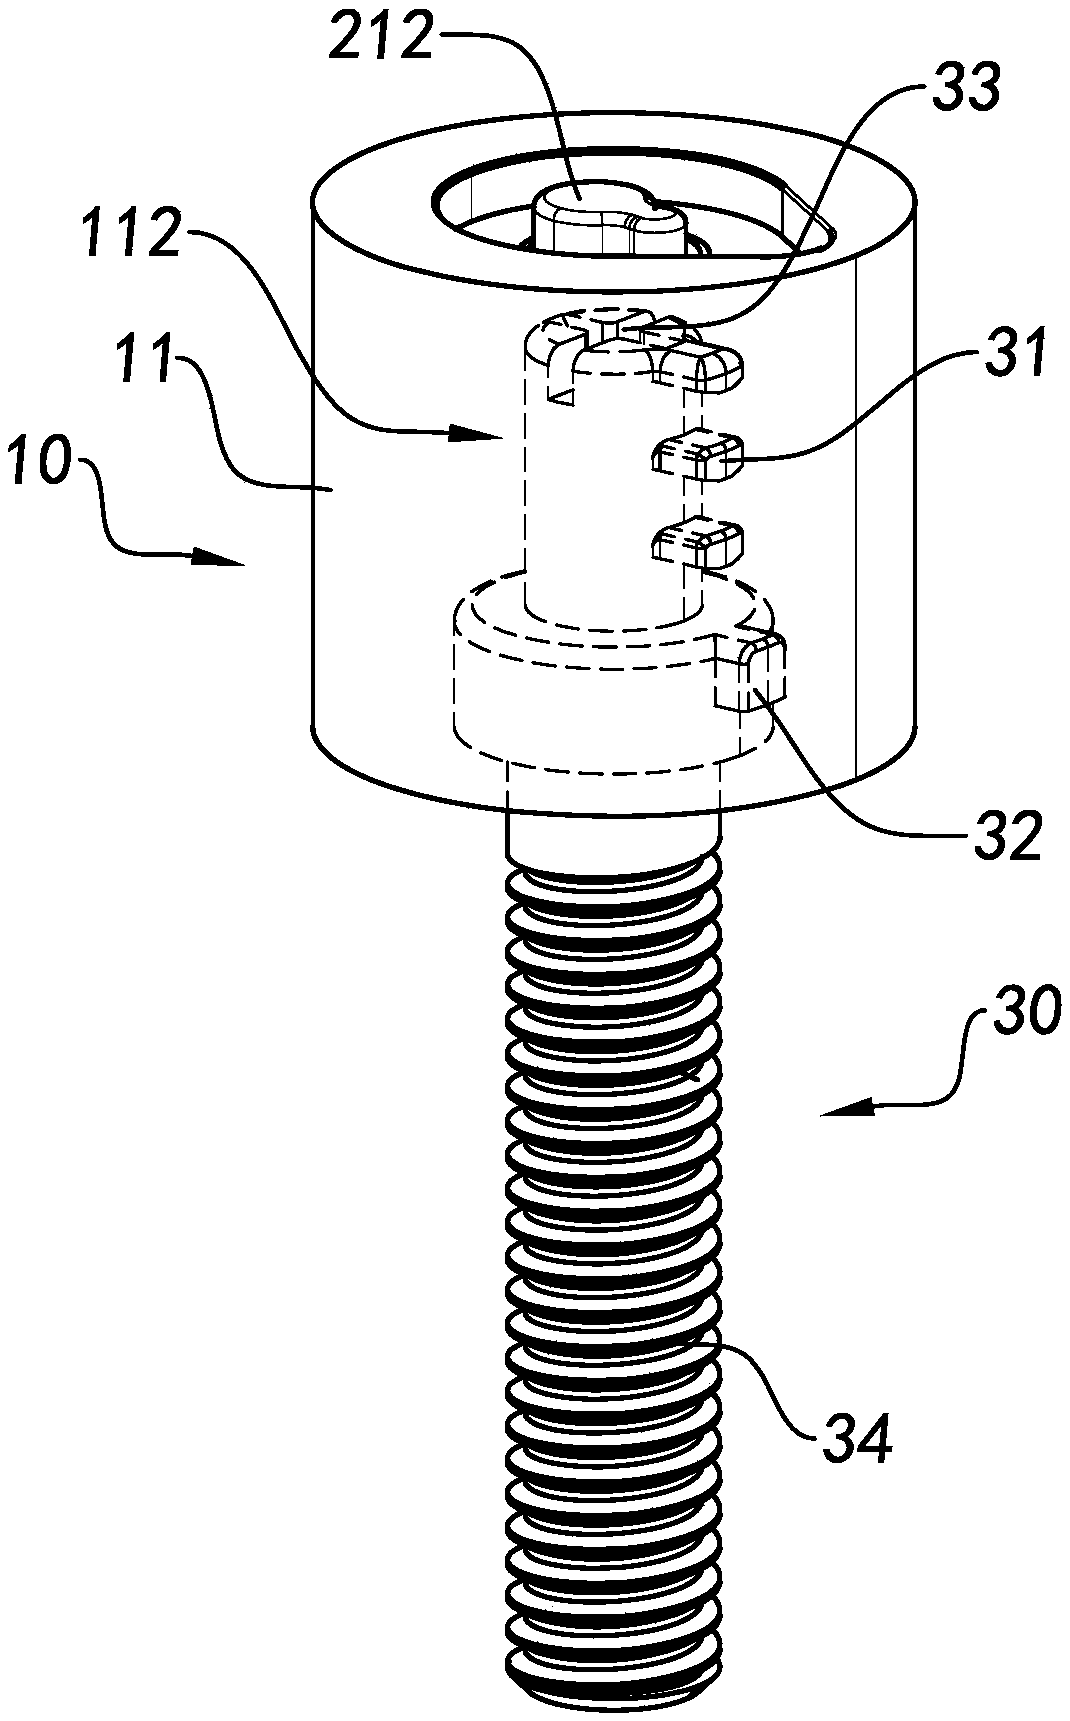 Screw connection with locking mechanism